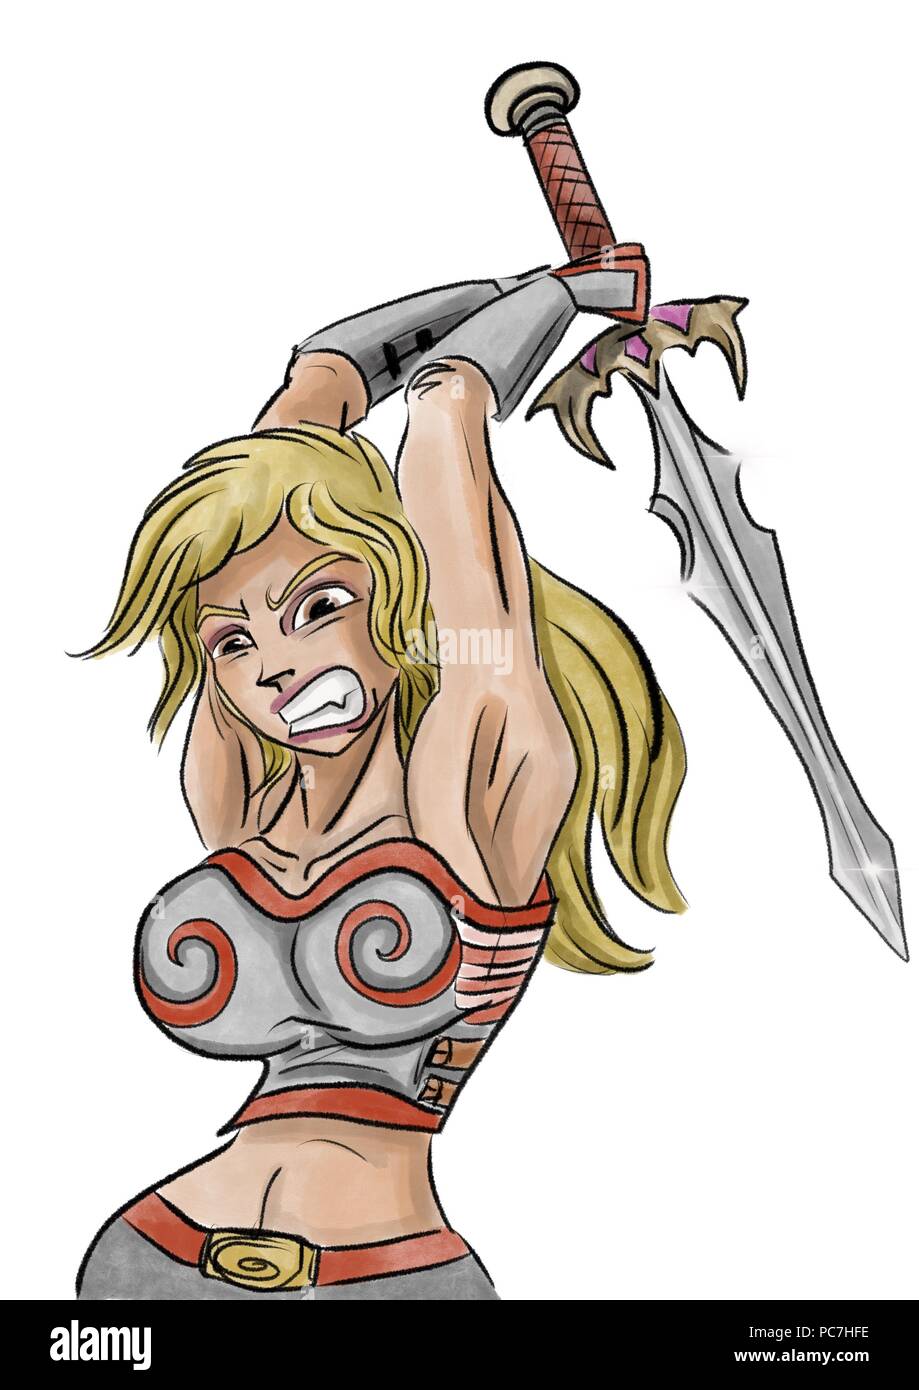 Female Barbarian hero with a sword Stock Photo